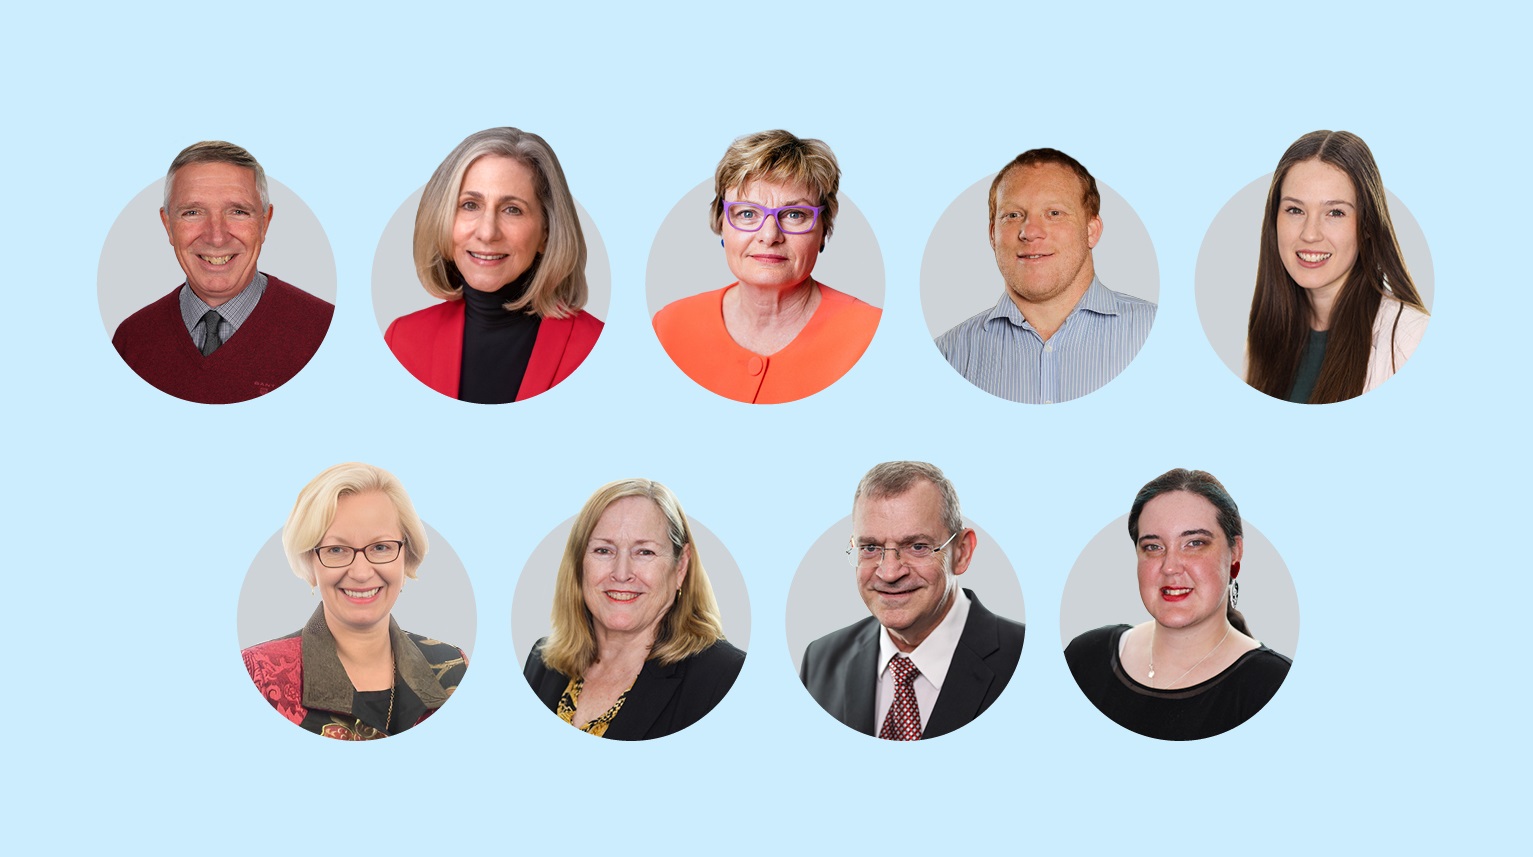 Nine photos of Council members' faces in individual circles on a light blue background.